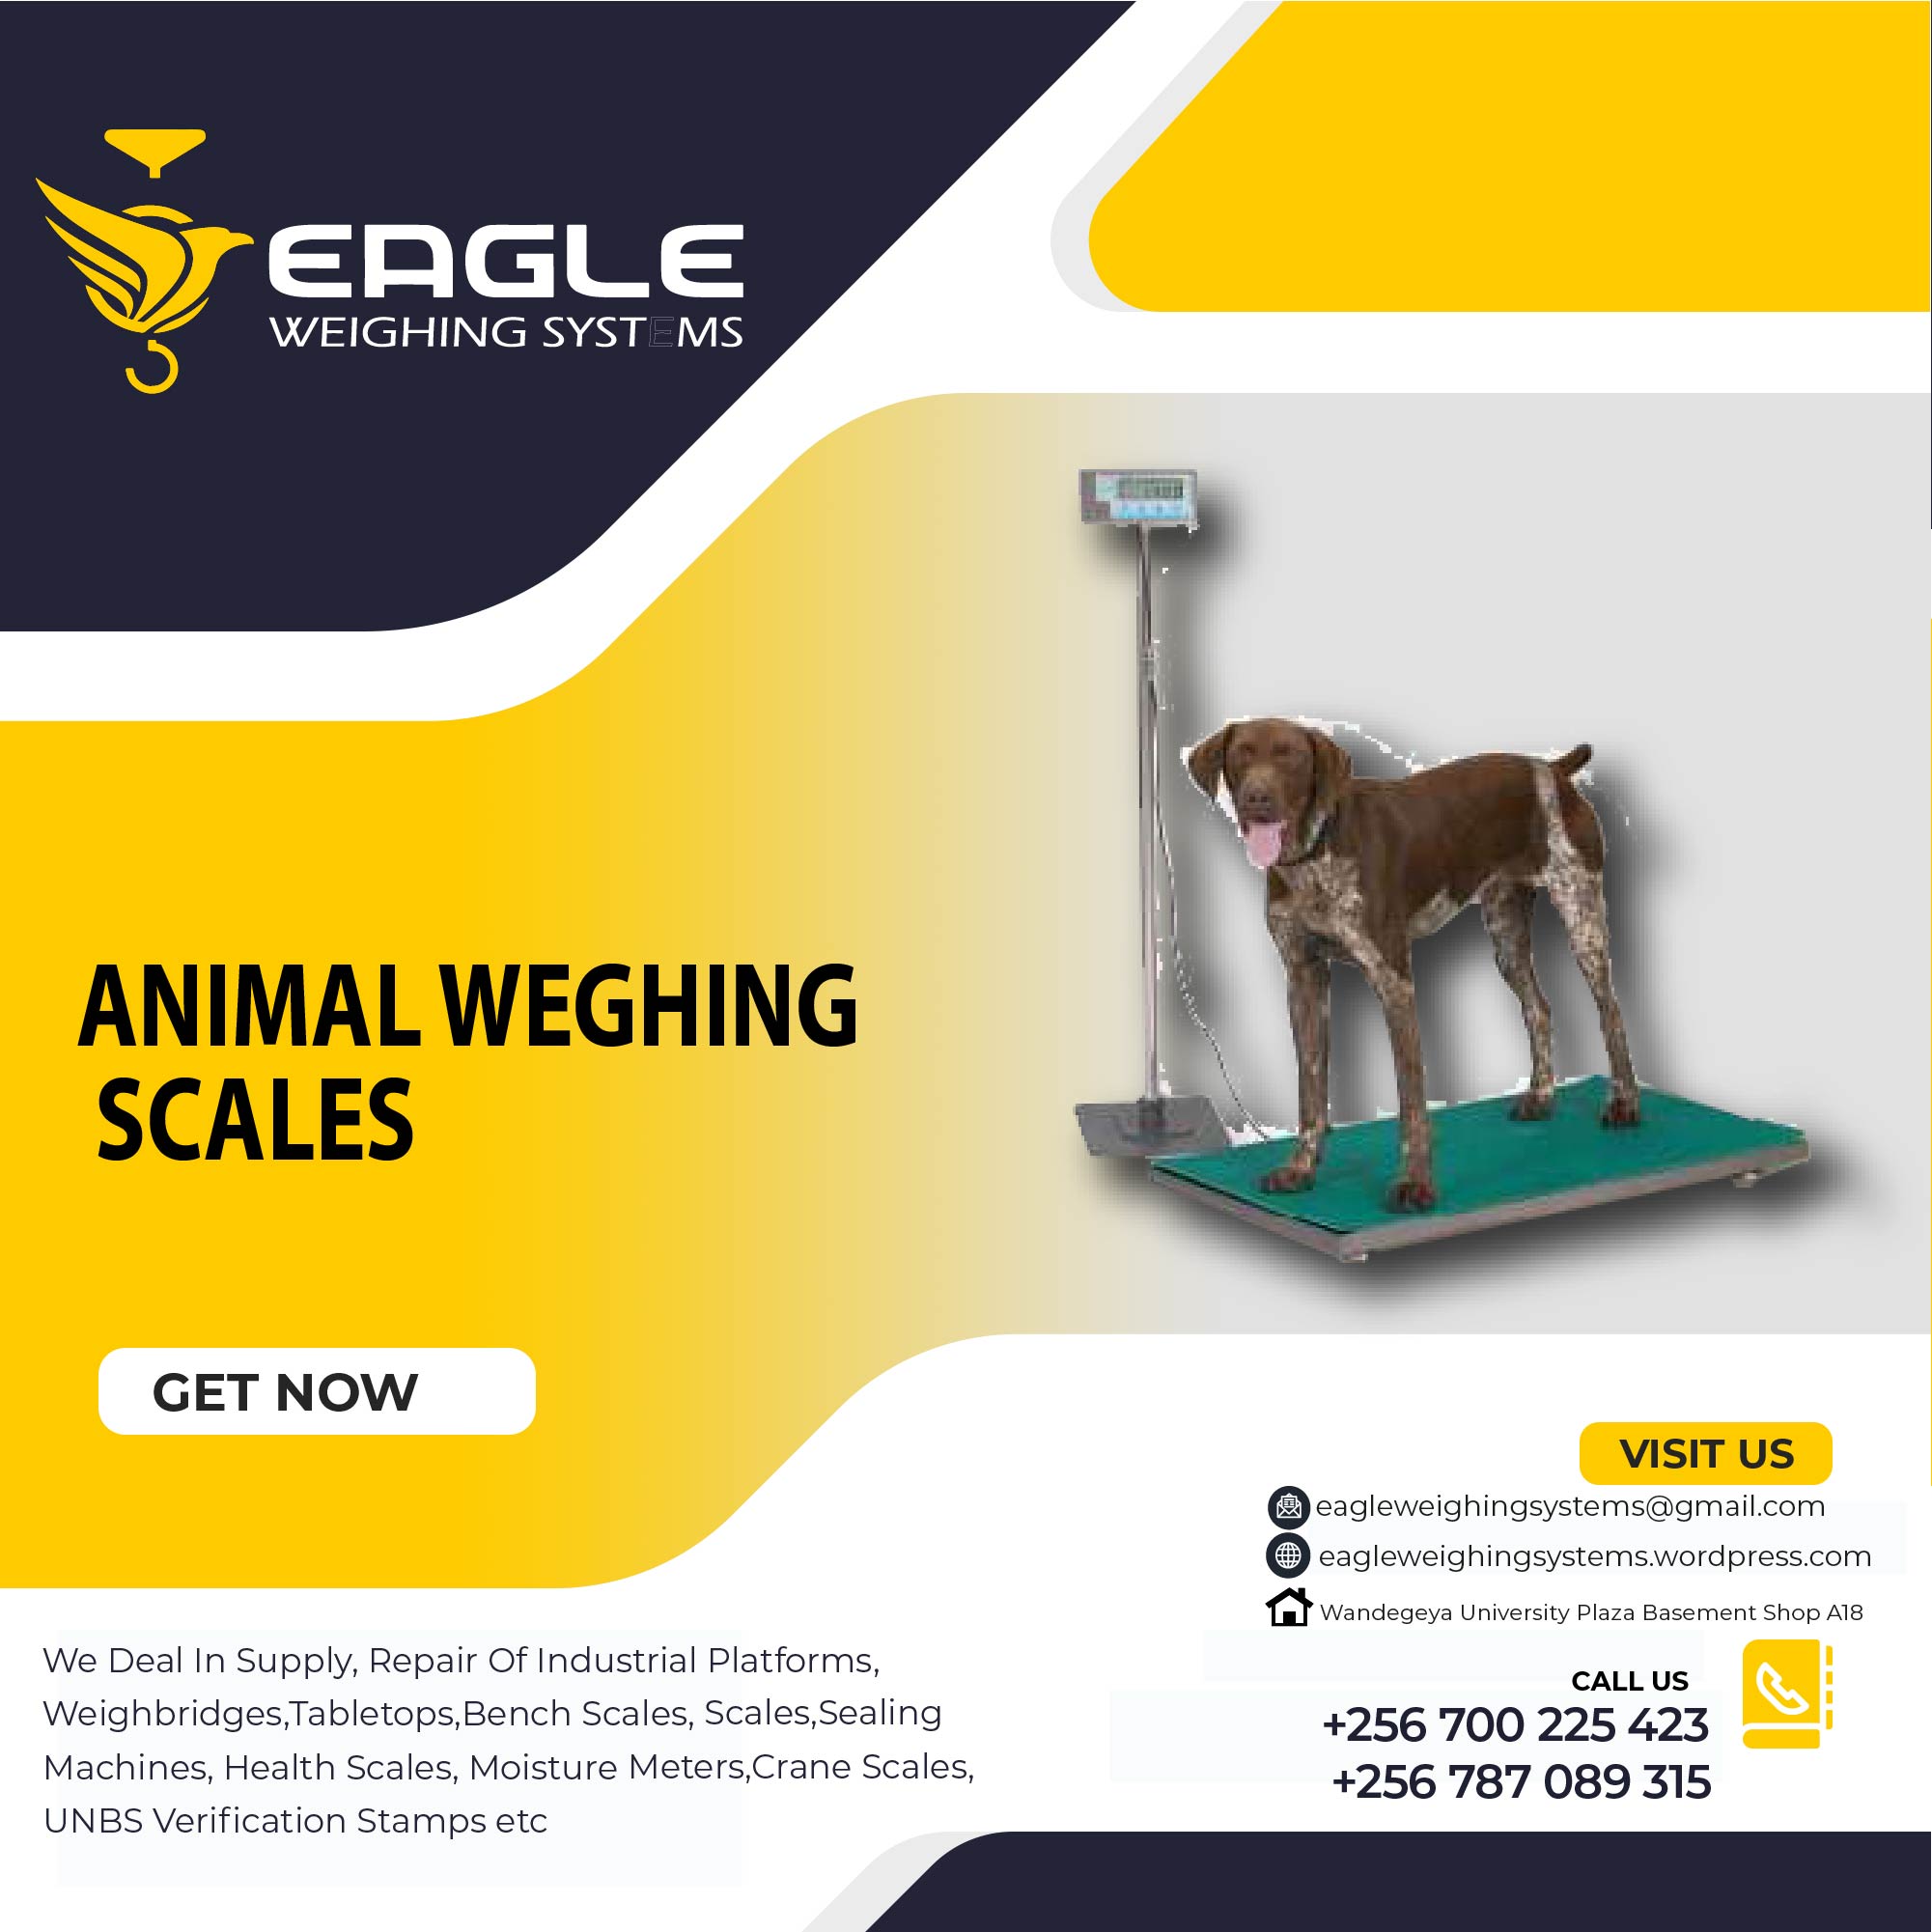 Heavy duty animal, cows, livestock weighing scales supplier of Uganda, Kampala Central Division, Central, Uganda